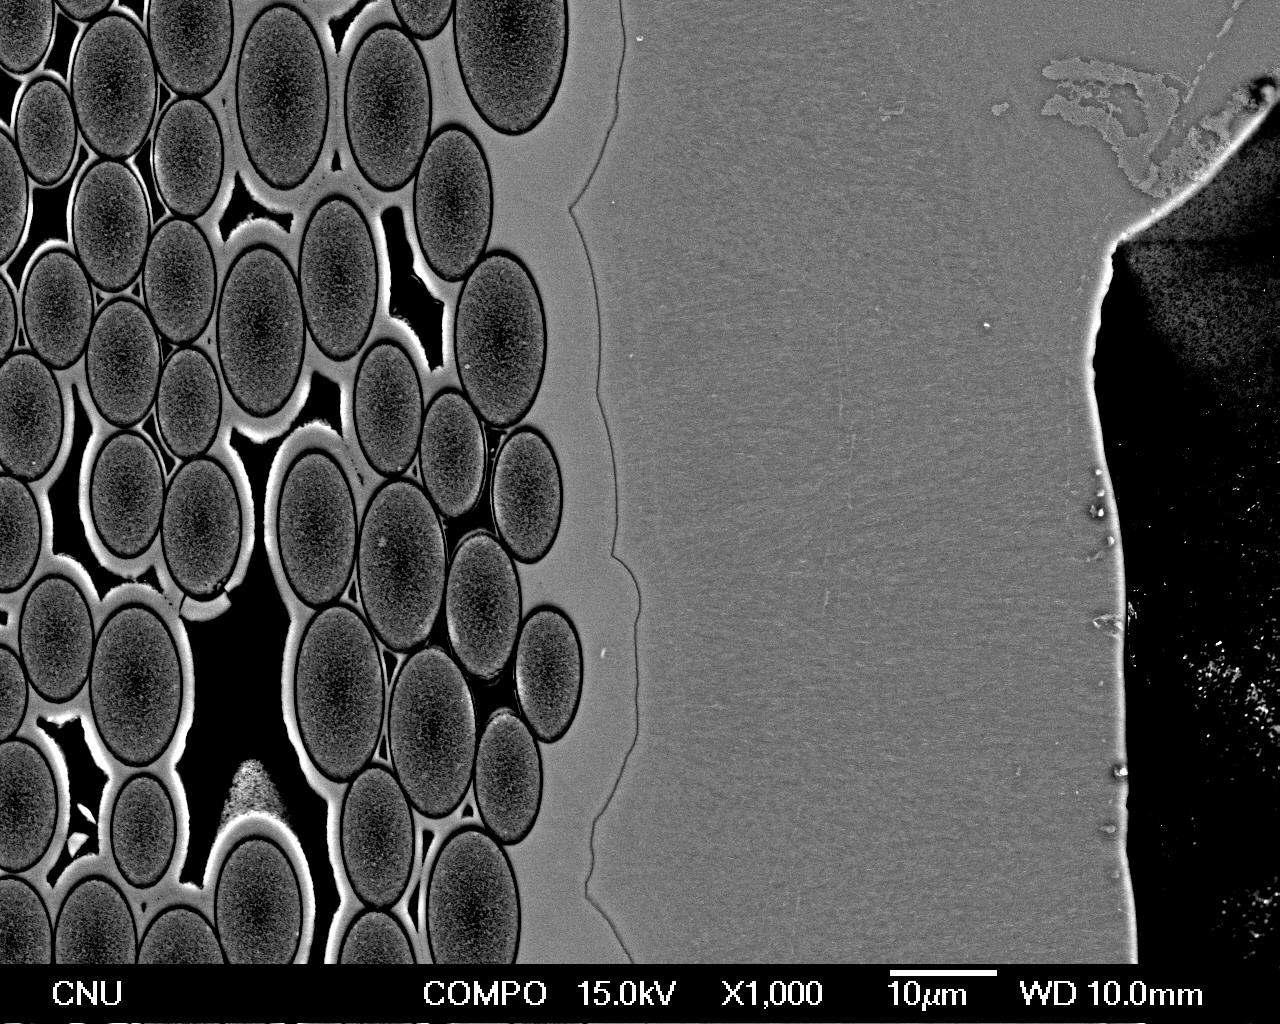 Back scattered electron image showing SiCf/SiC composite and SiC outer layers.